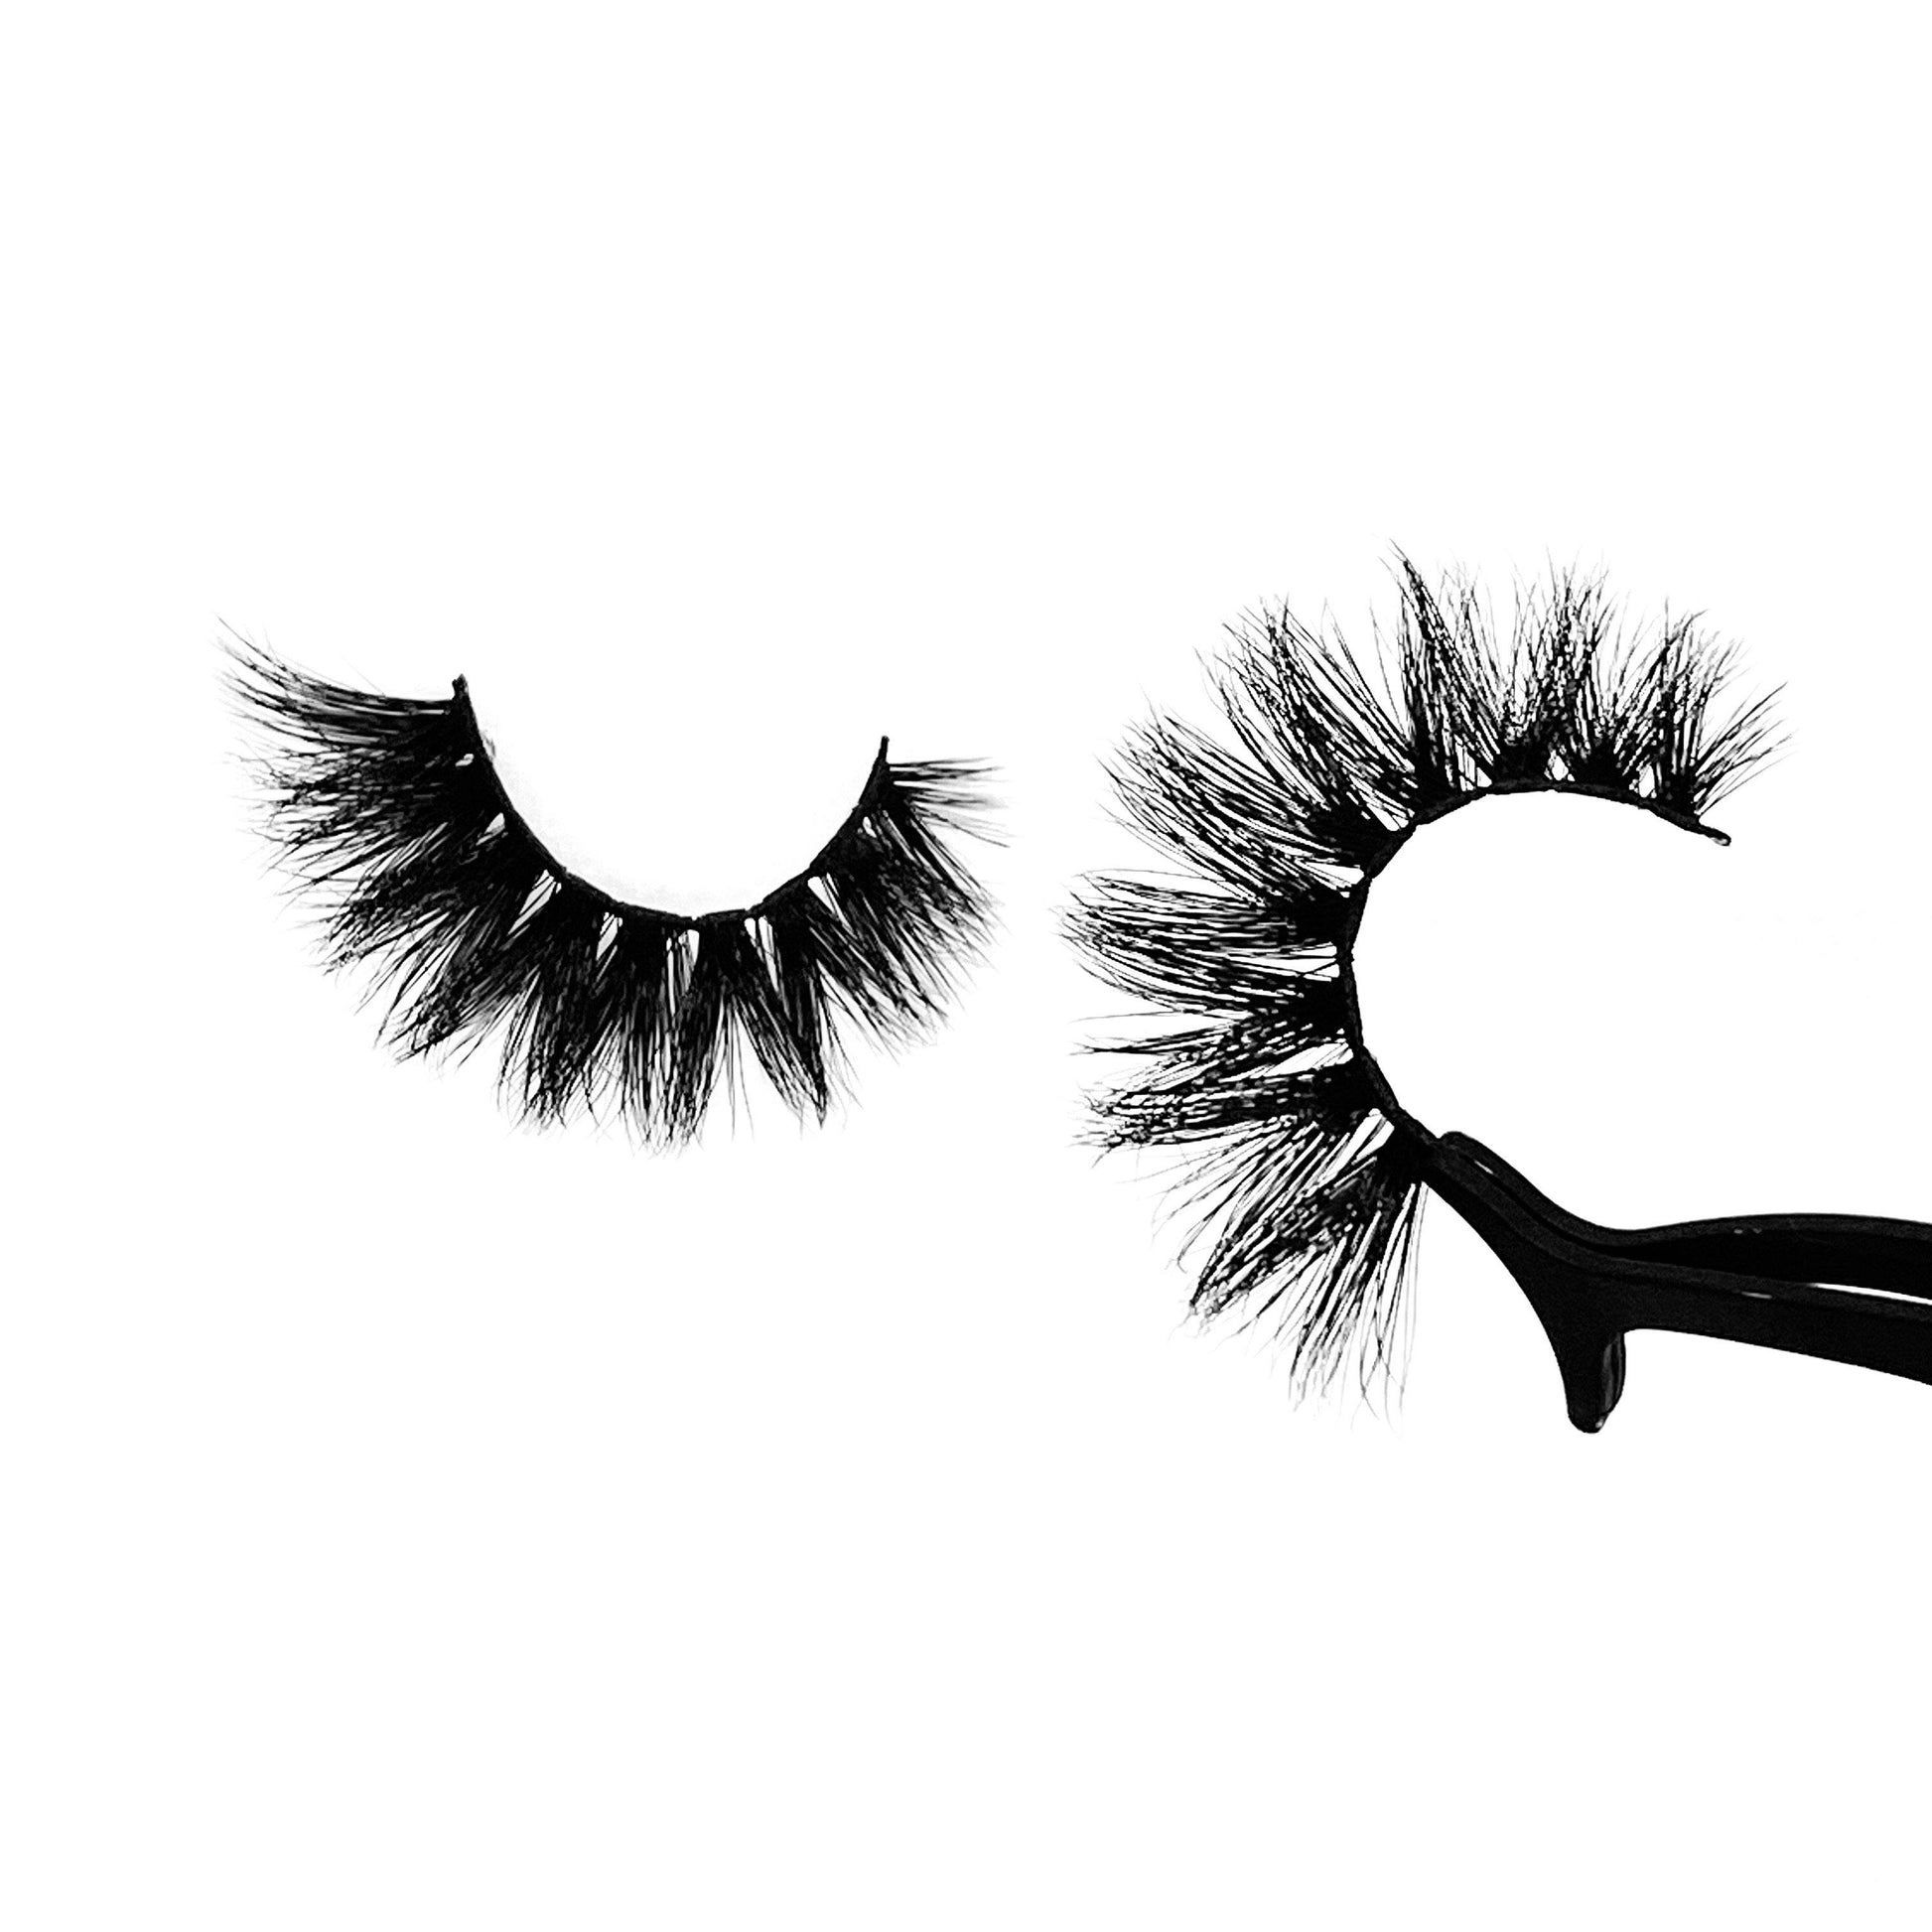 Finesser-High Volume-You're guaranteed to get away with anything in our full and fluffy "Finesser" lashes. "Finesser" is longer on the outer corners, giving you a fierce cat-eye look. These lashes serve extra glam for our ladies that love a sexy, wispy, dramatic look! Also available in our "Boss Up (3-Pack)." Try our "Amour" lashes for a shorter look! Description Handmade, Cruelty-Free, Wear up to 30x Material: 100% Mink Band: Thin, Black Cotton Band Volume: High Style: Dramatic, Long, Wispy, Ca